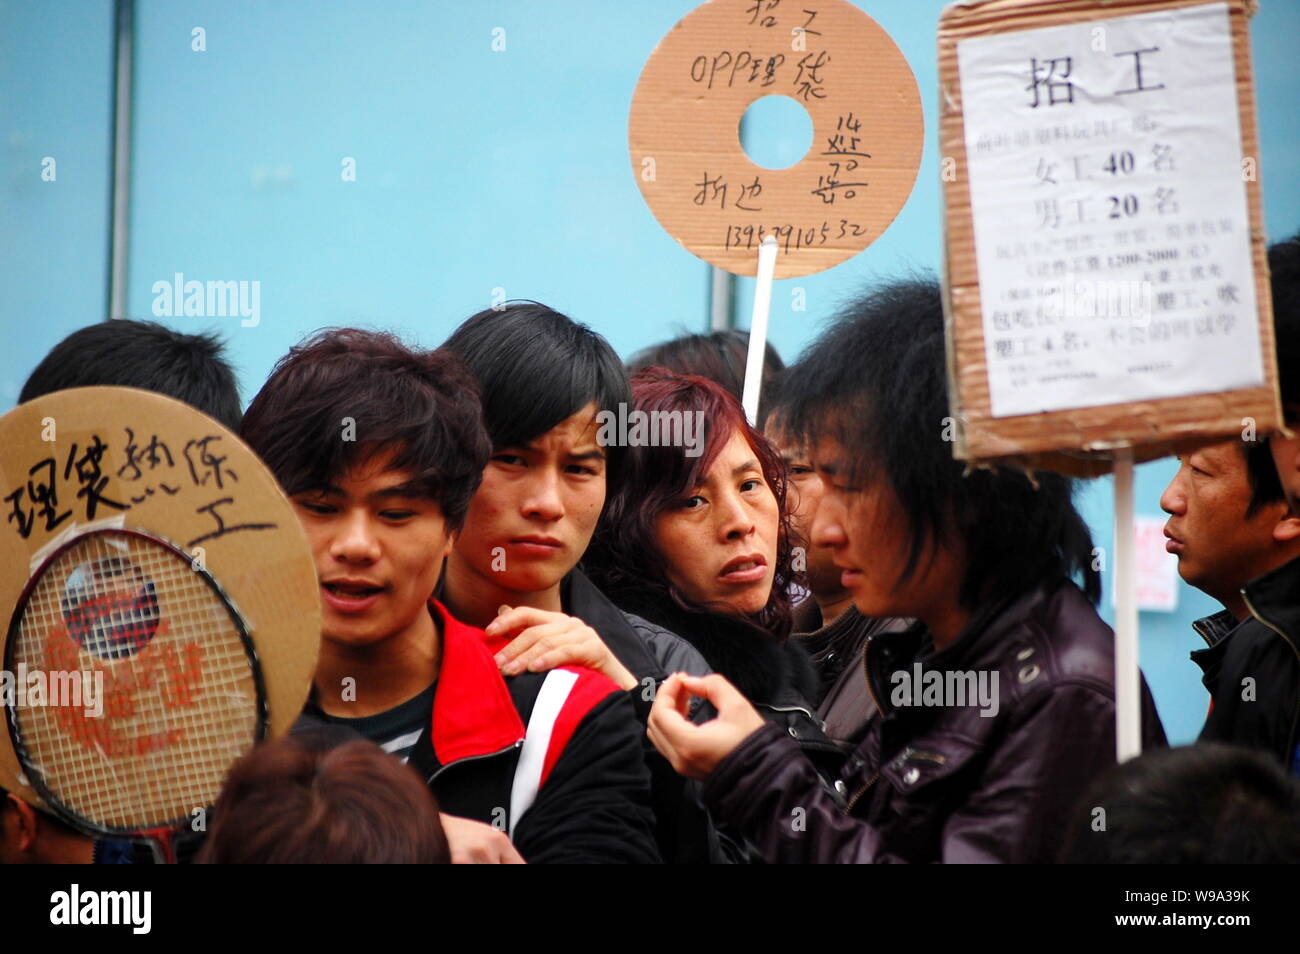 Chinese factory representatives show job offers at a labour market in Yiwu city, east Chinas Zhejiang province, 24 February 2010.   Labor shortages in Stock Photo